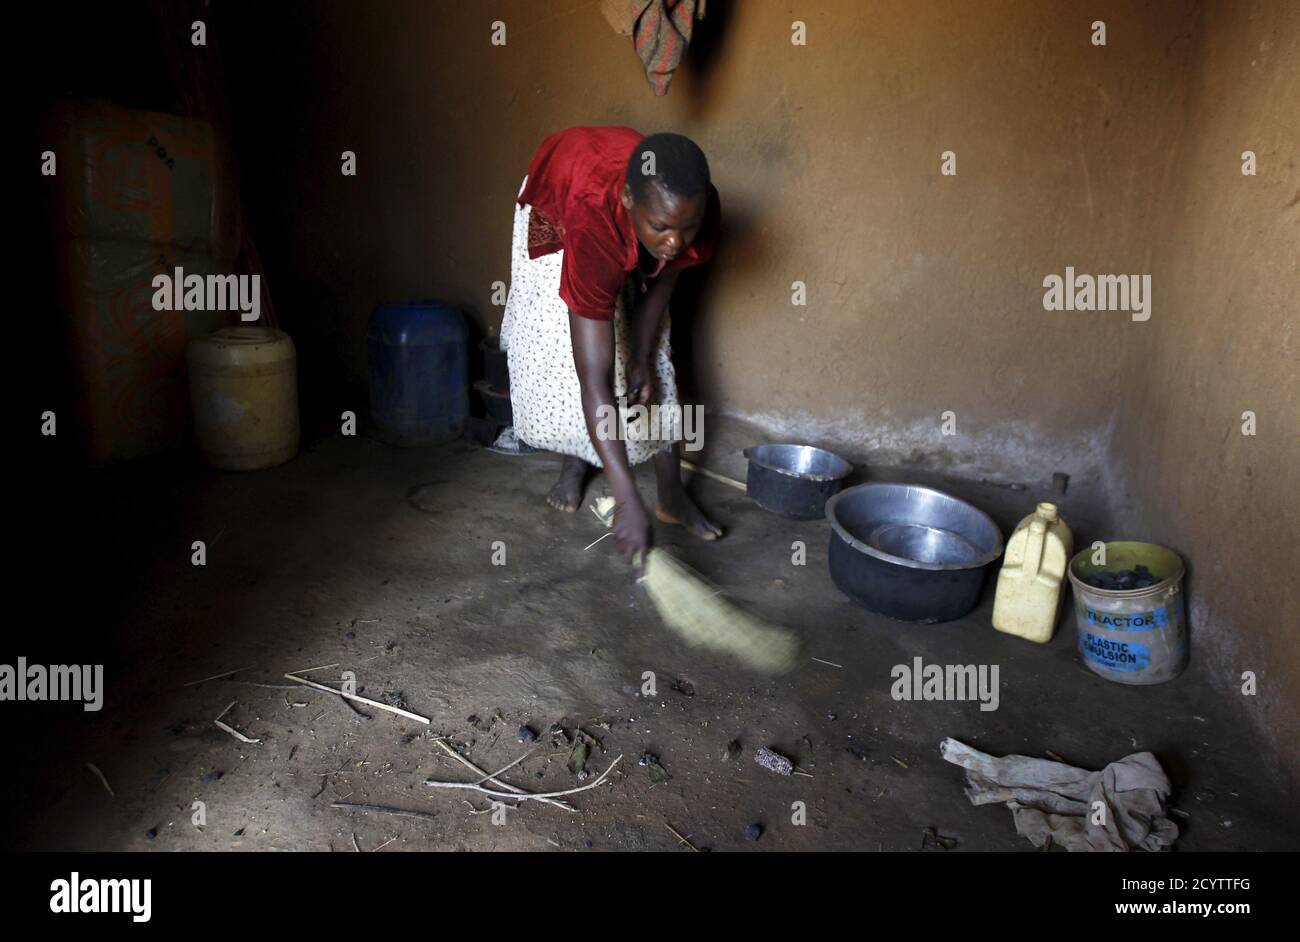 Mary Adhiambo, sweeps her kitchen in the U.S. President Barack Obama's ancestral village of Nyang'oma Kogelo, west of Kenya's capital Nairobi, July 15, 2015. Adhiambi, 25, said they benefited from Barack Obama's Presidency as they have well tarmacked roads and electricity was connected to the village. 'We received grants to build houses and shelter from the harsh weather as an indirect benefit from President Obama's leadership' she said. President Obama visits Kenya and Ethiopia in July, his third major trip to Sub-Saharan Africa after travelling to Ghana in 2009 and to Tanzania, Senegal and S Stock Photo